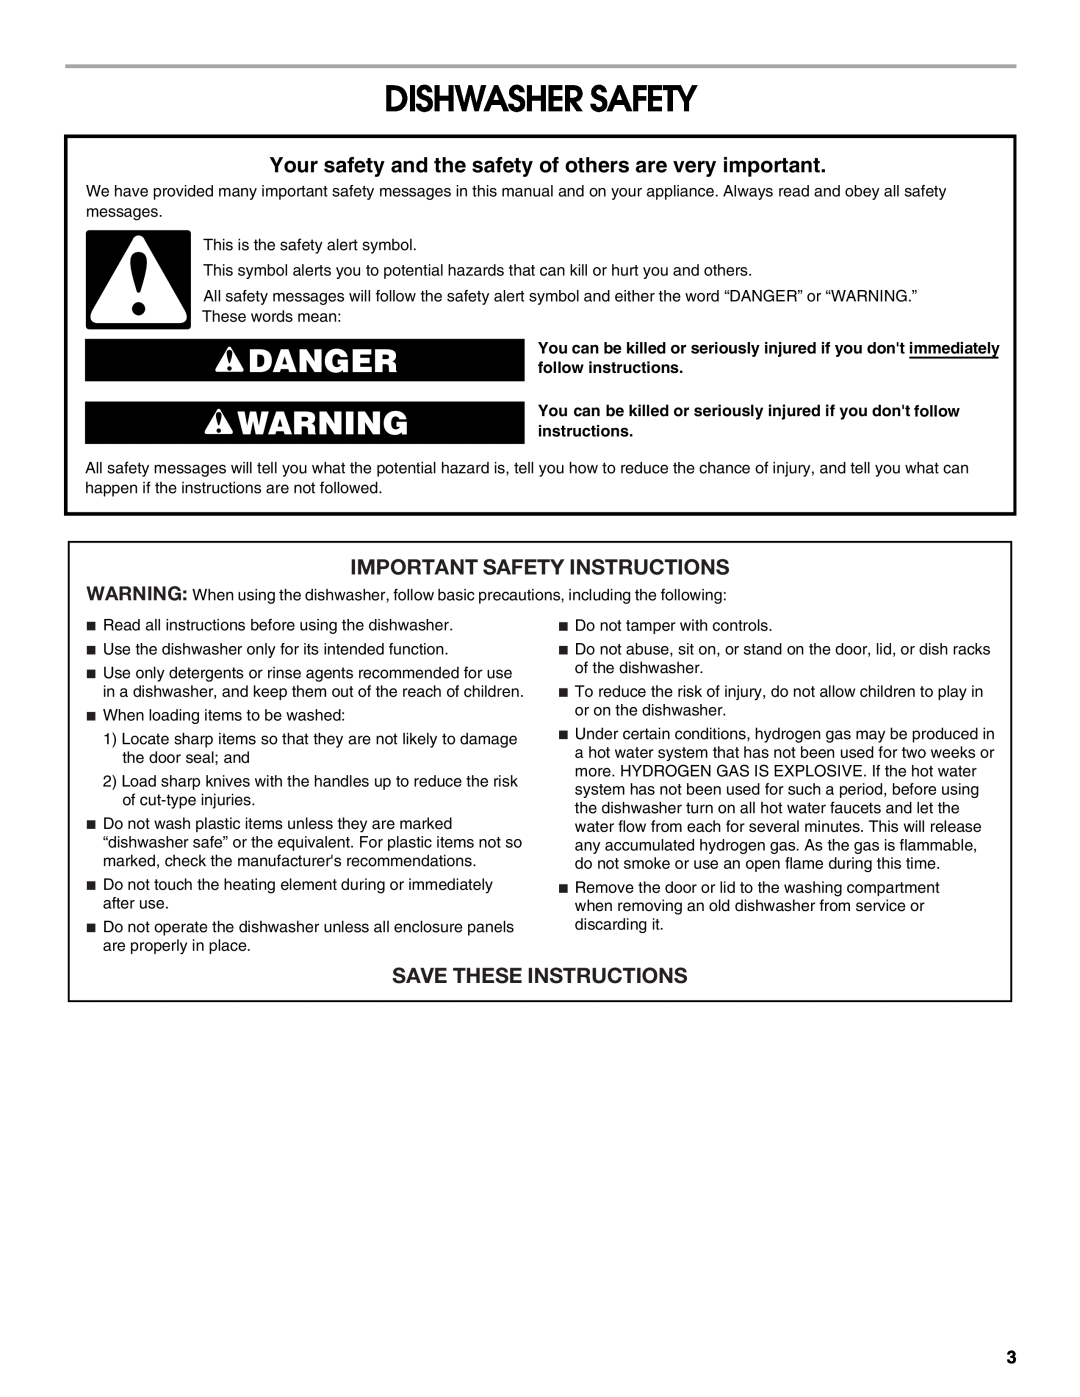 Whirlpool TUD8750S manual Dishwasher Safety, Important Safety Instructions, Save These Instructions, Danger 